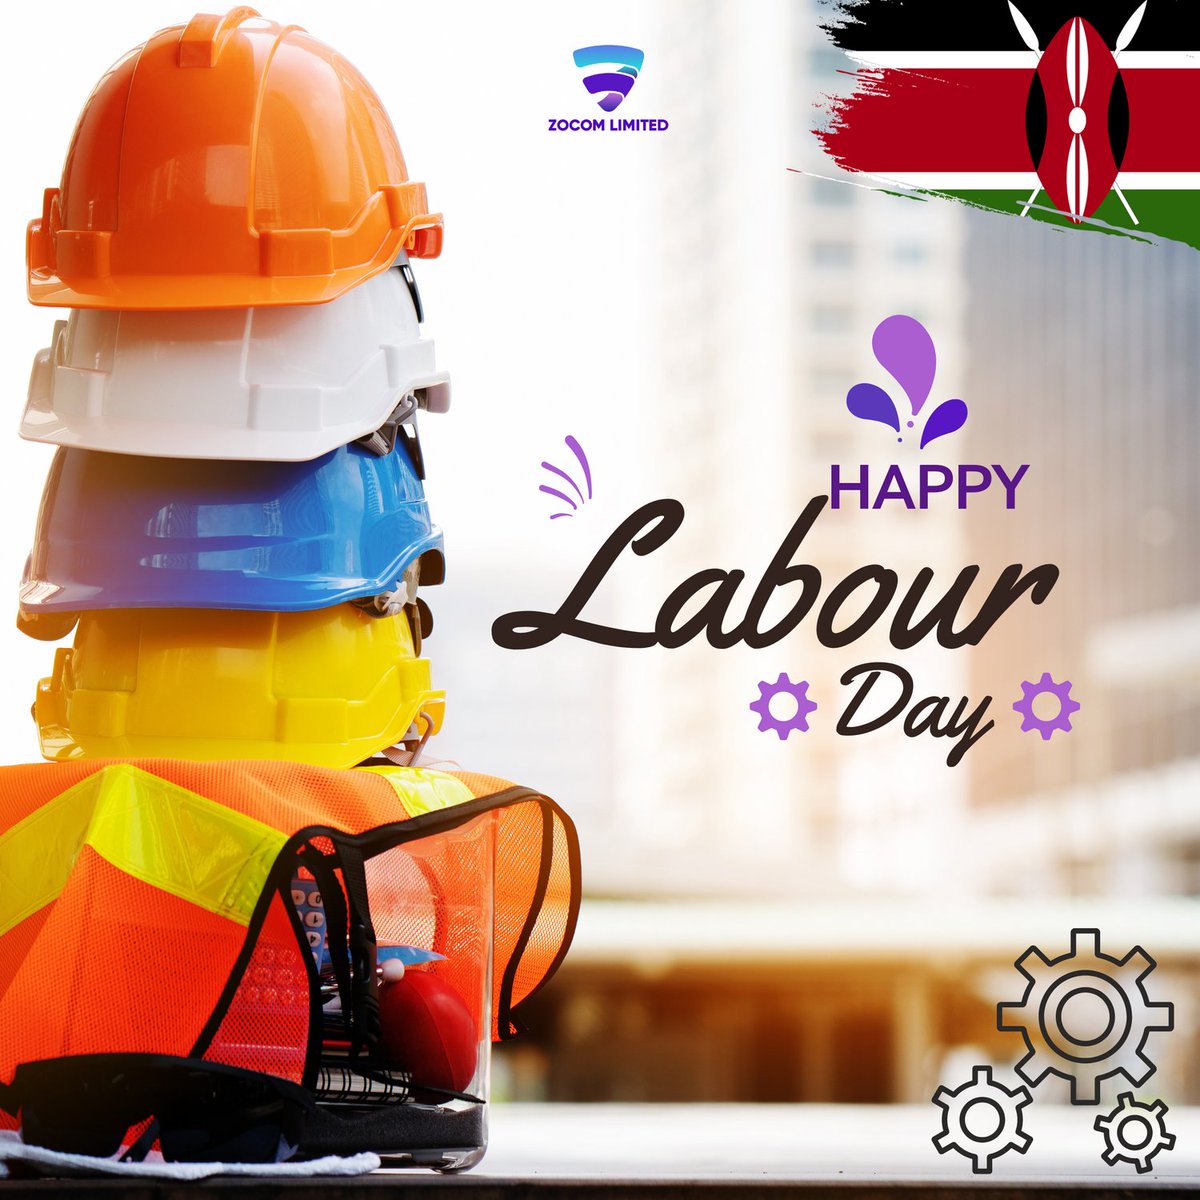 Today we celebrate the hard work and dedication of all Kenyan workers! It's because of you that our economy thrives. Enjoy your well-deserved rest and celebrate your achievements! 

 #CelebrateLabourDay #OurWorkforce #safetyfirst